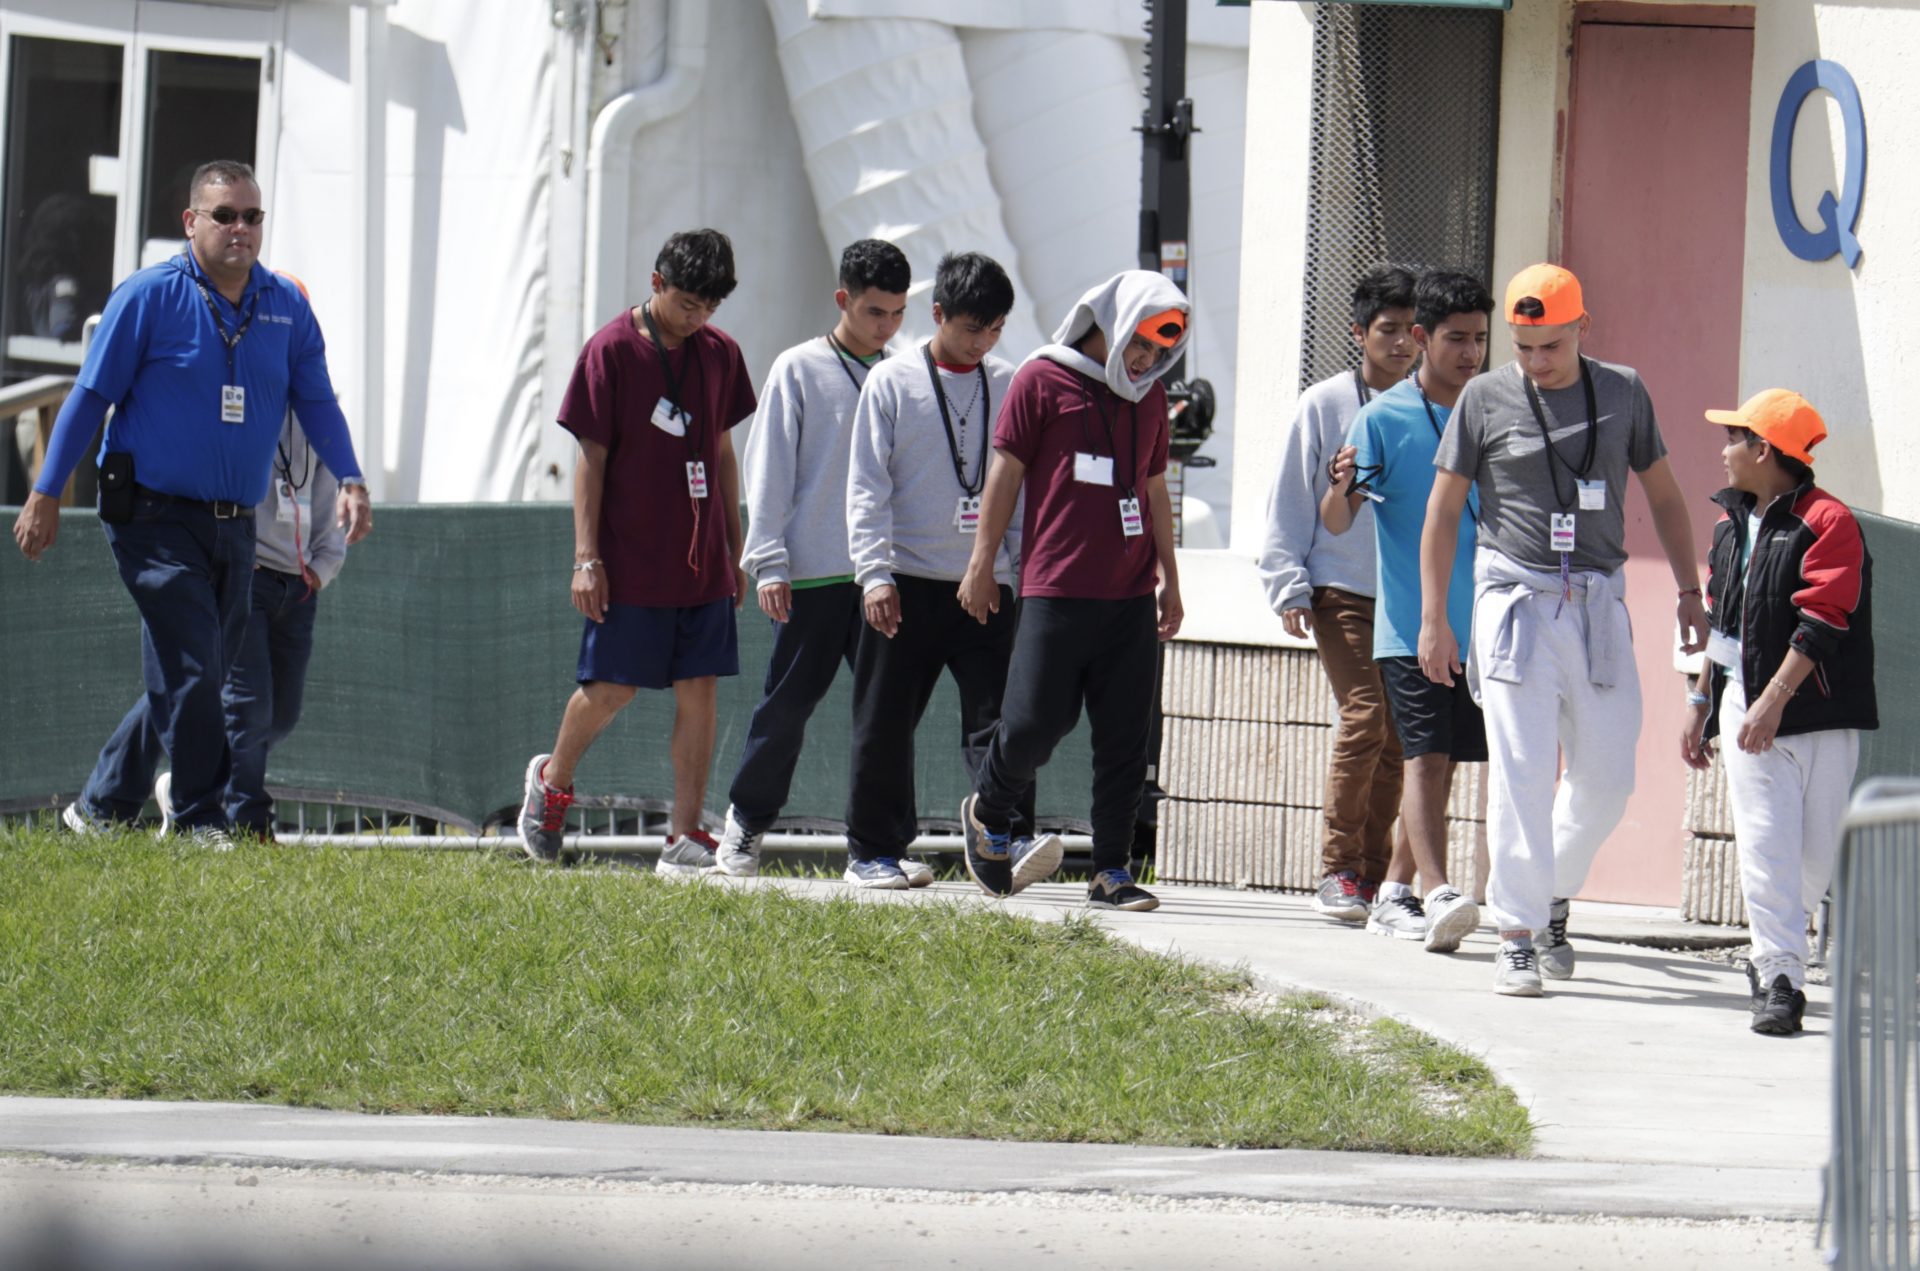 Migrant children walk on the grounds of the Homestead Temporary Shelter for Unaccompanied Children, Monday, July 15, 2019, in Homestead, Fla.